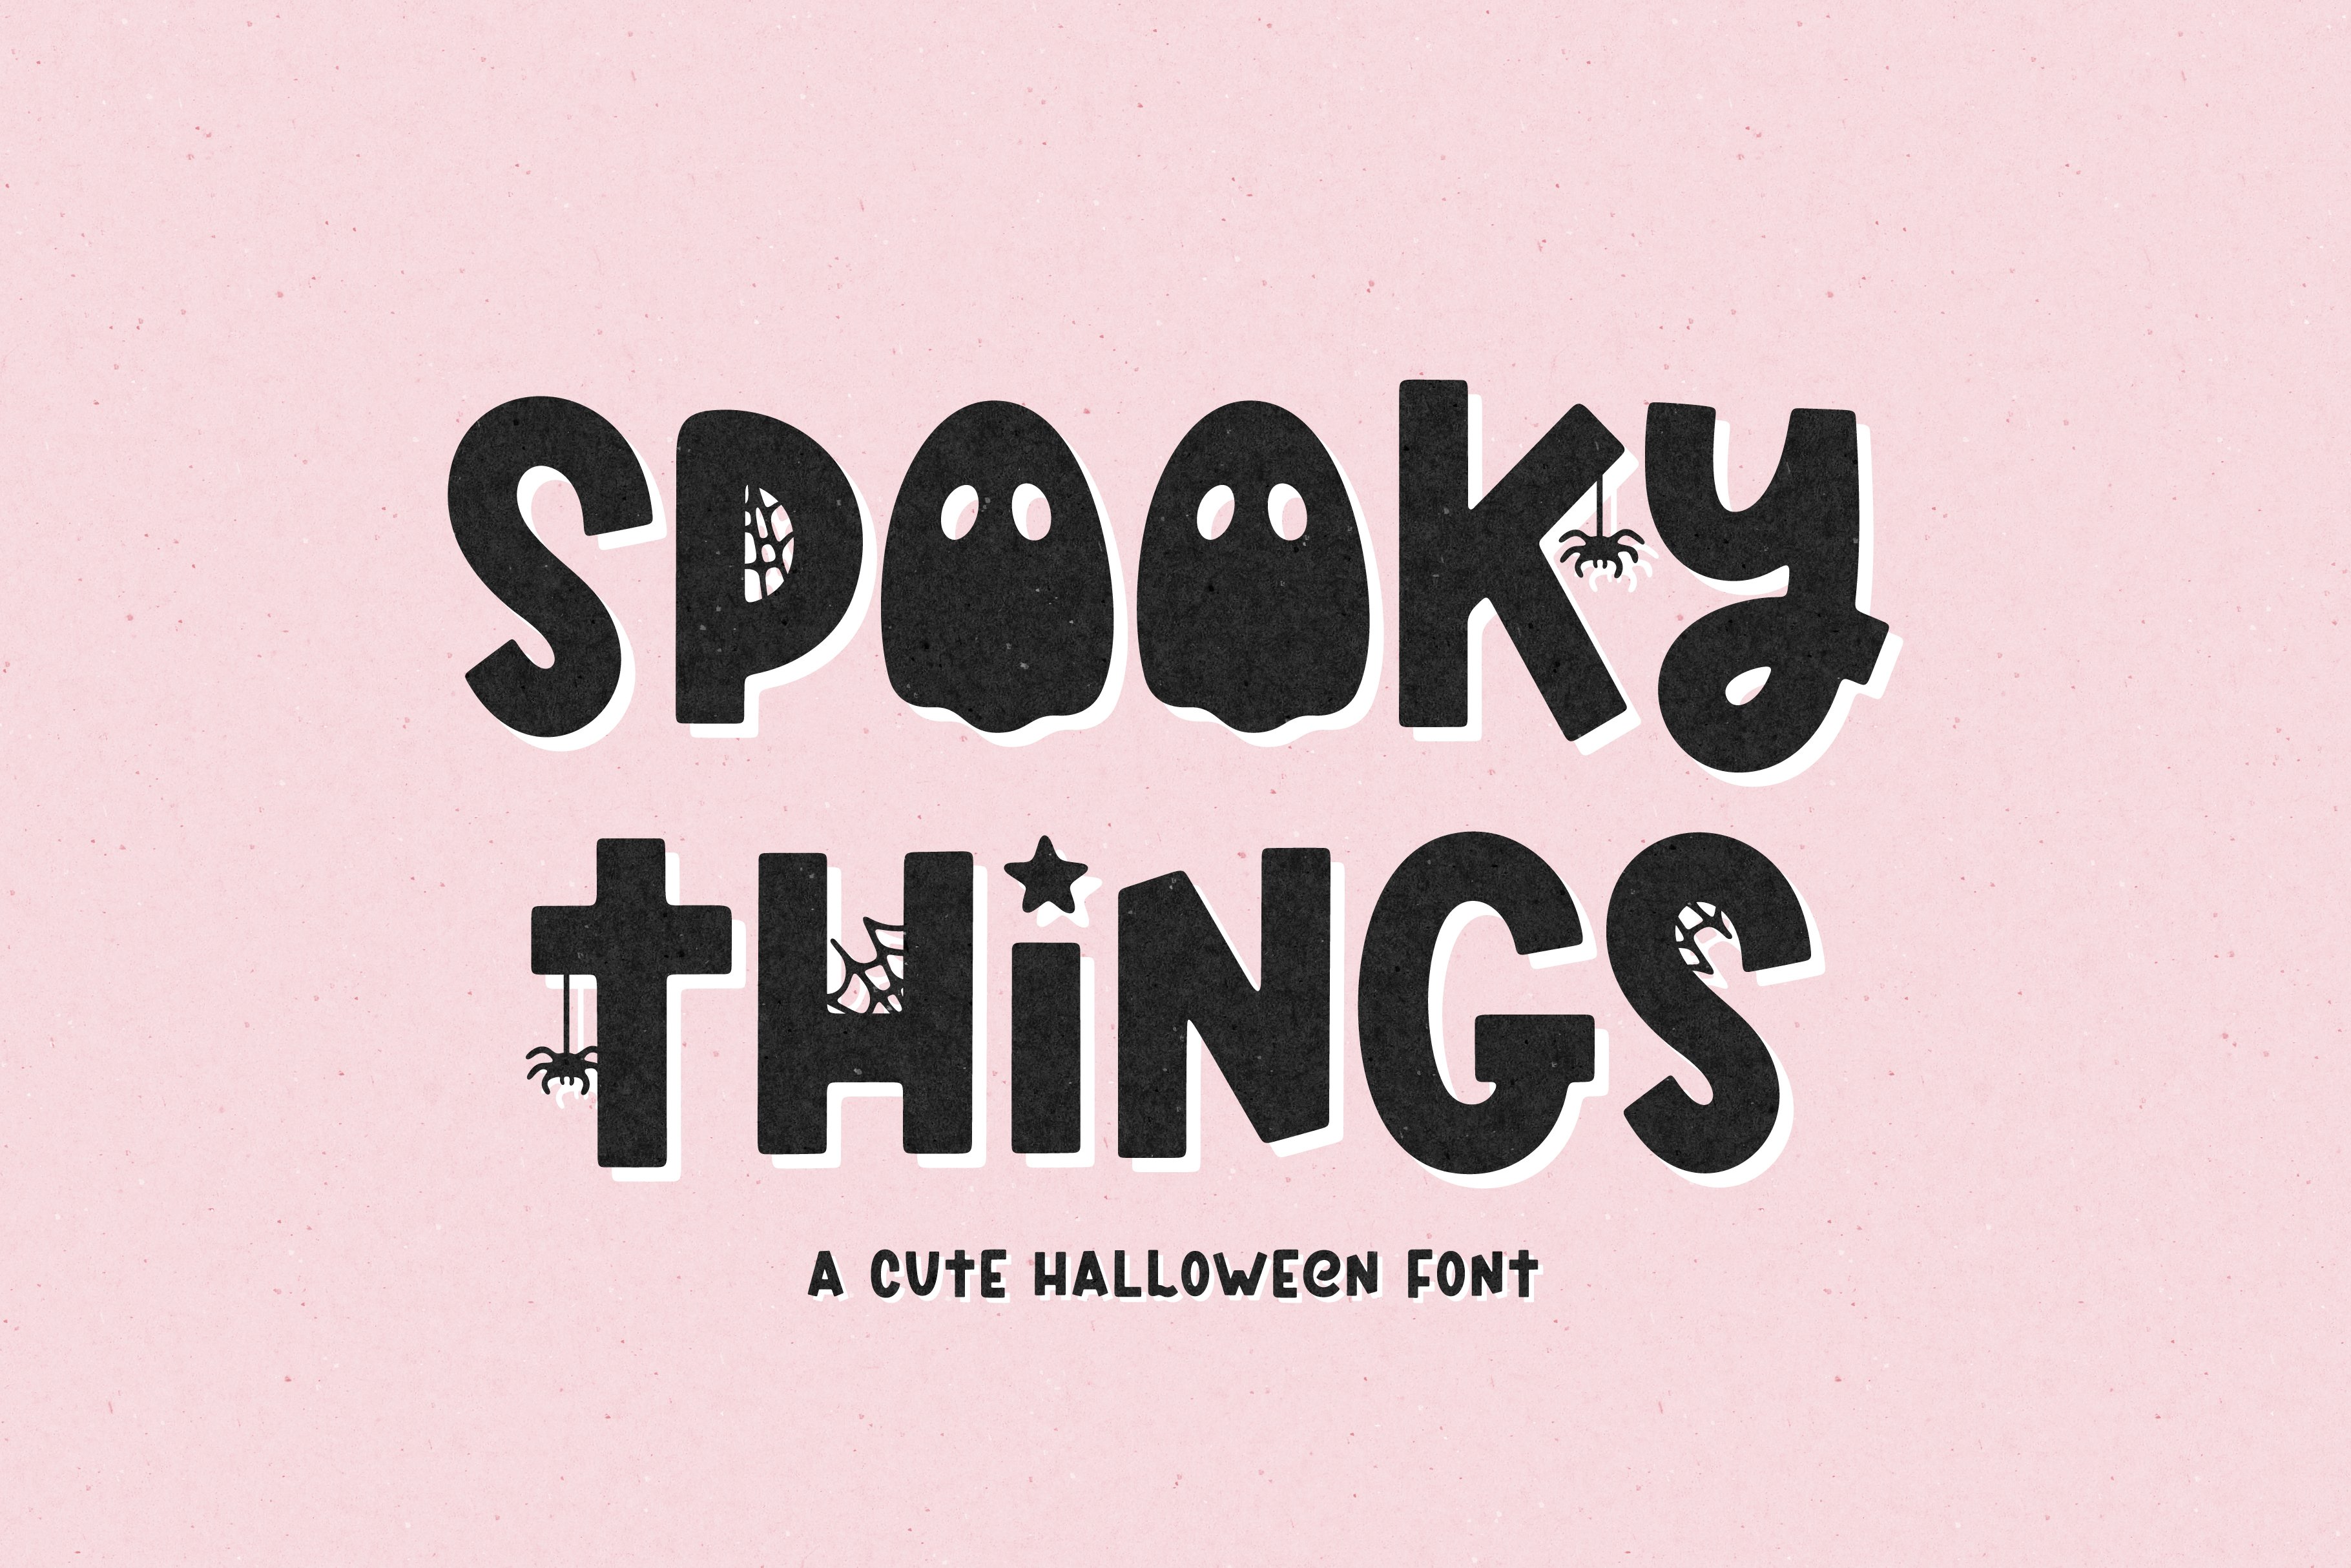 Spooky Things - Cute Halloween Font cover image.